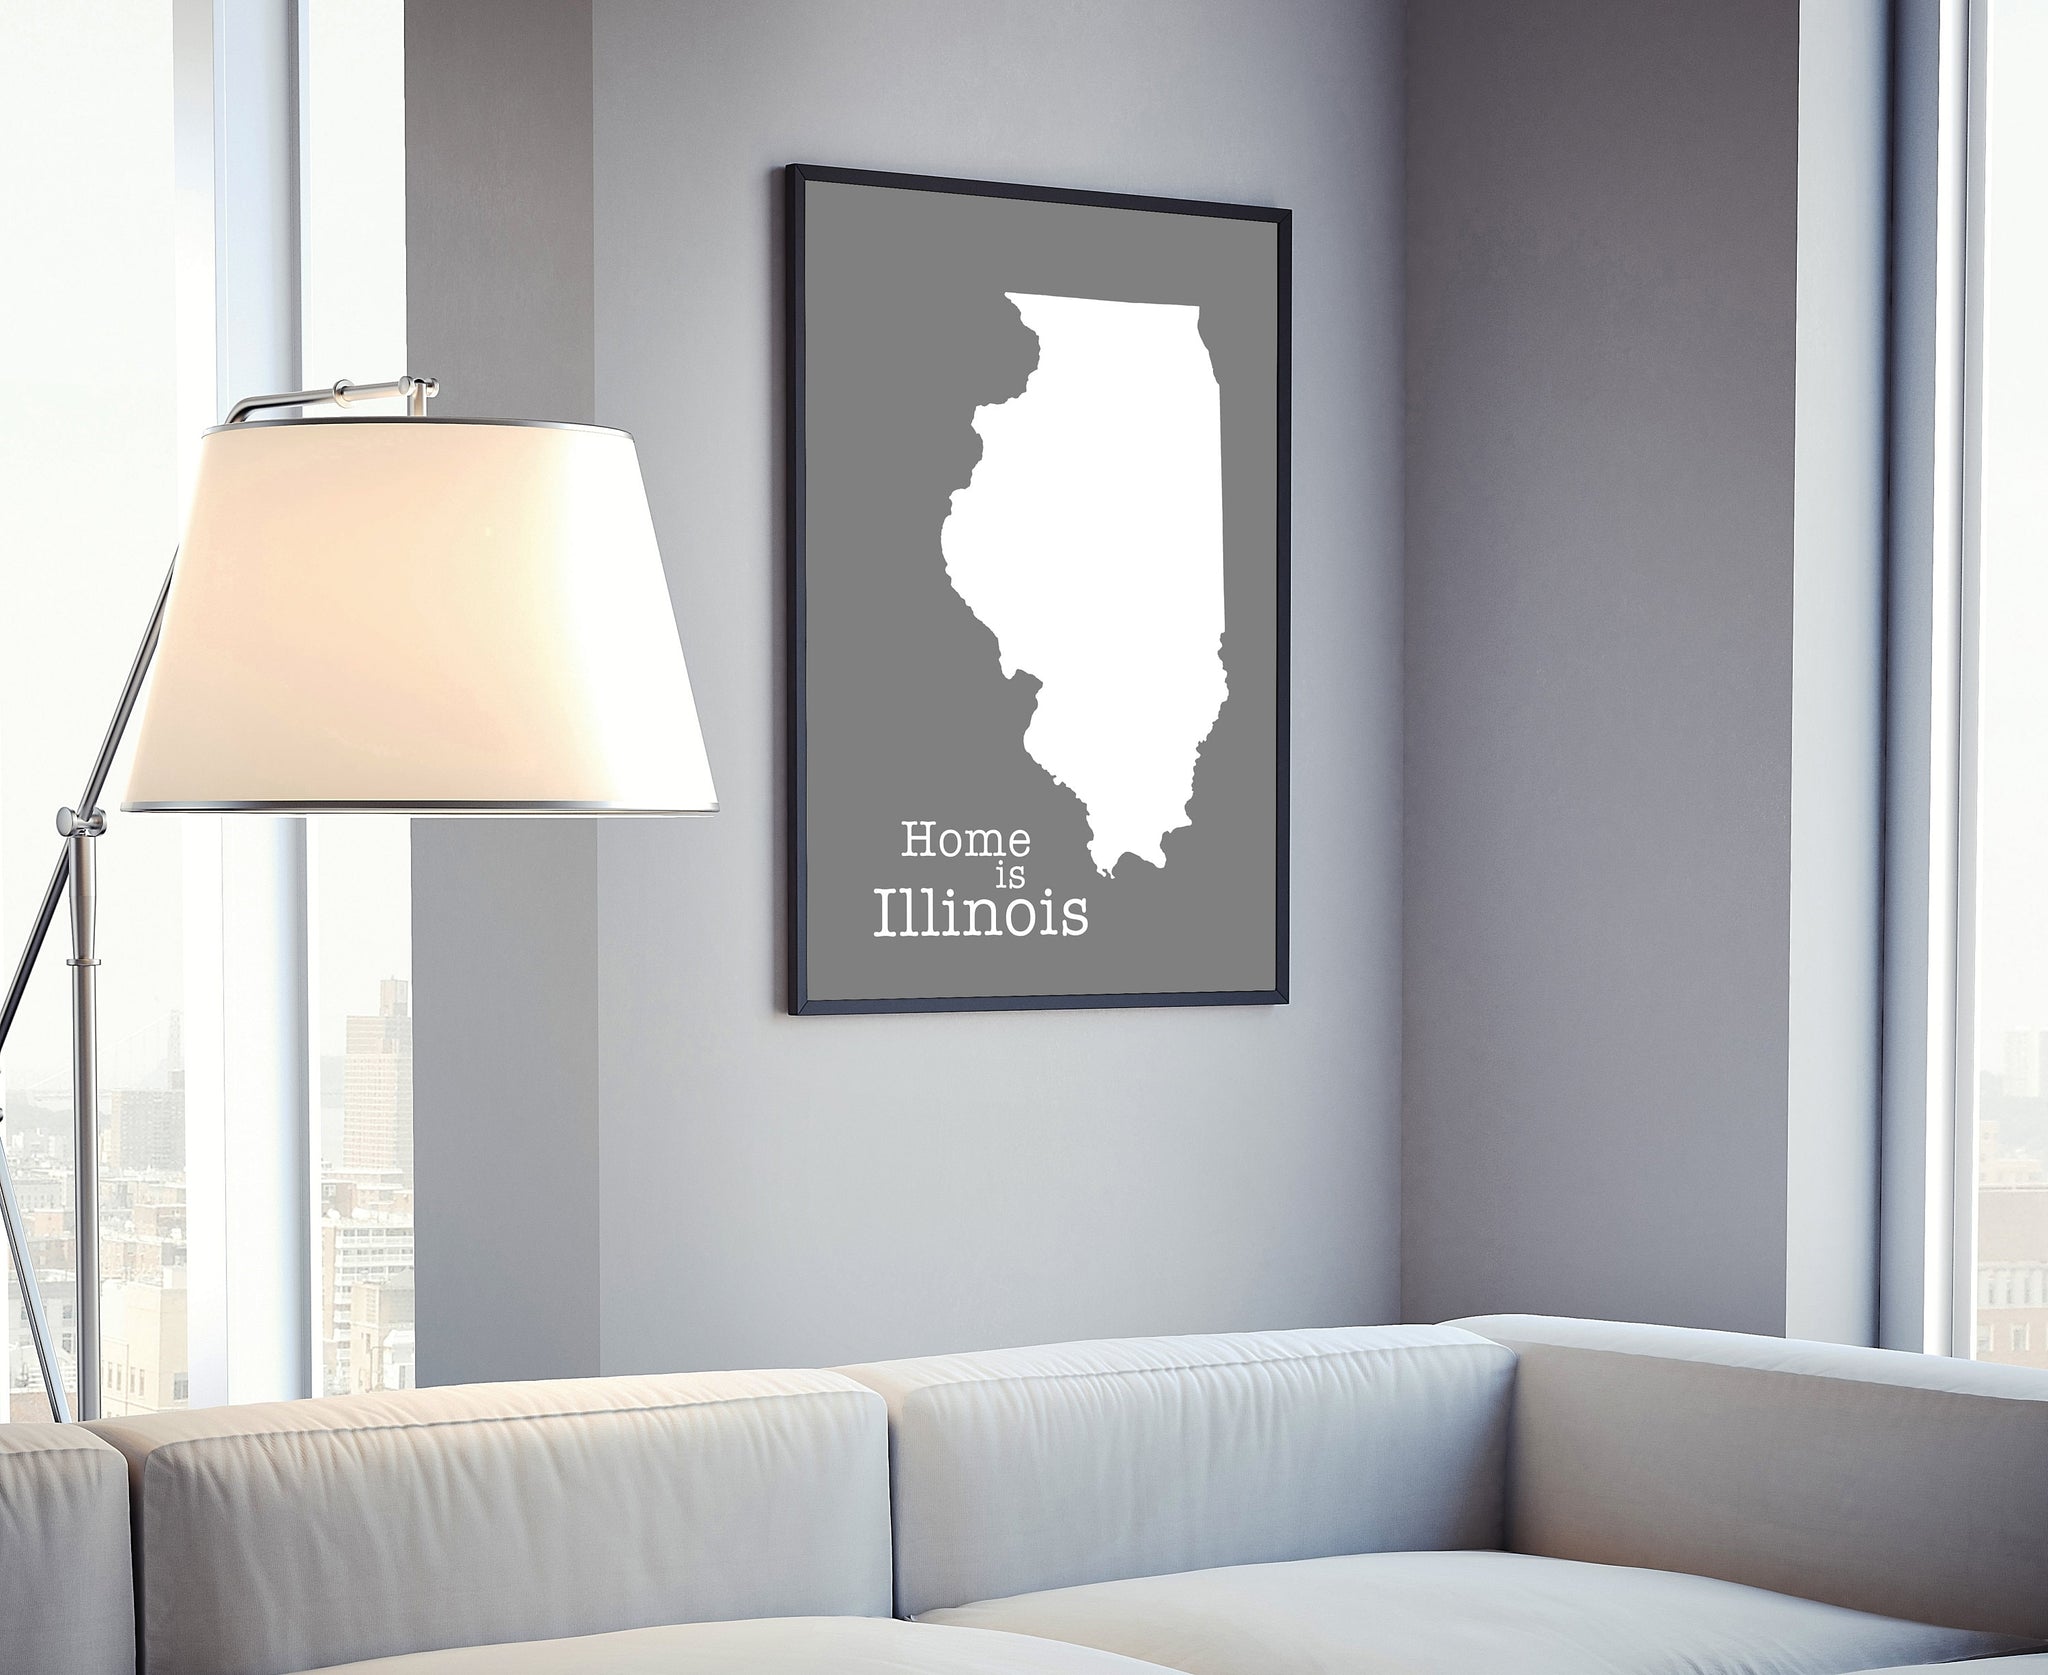 Illinois Map Wall Art, Illinois Map Poster Print, City map wall decor, Illinois State Poster, Home decor, Office decor, Family room decor